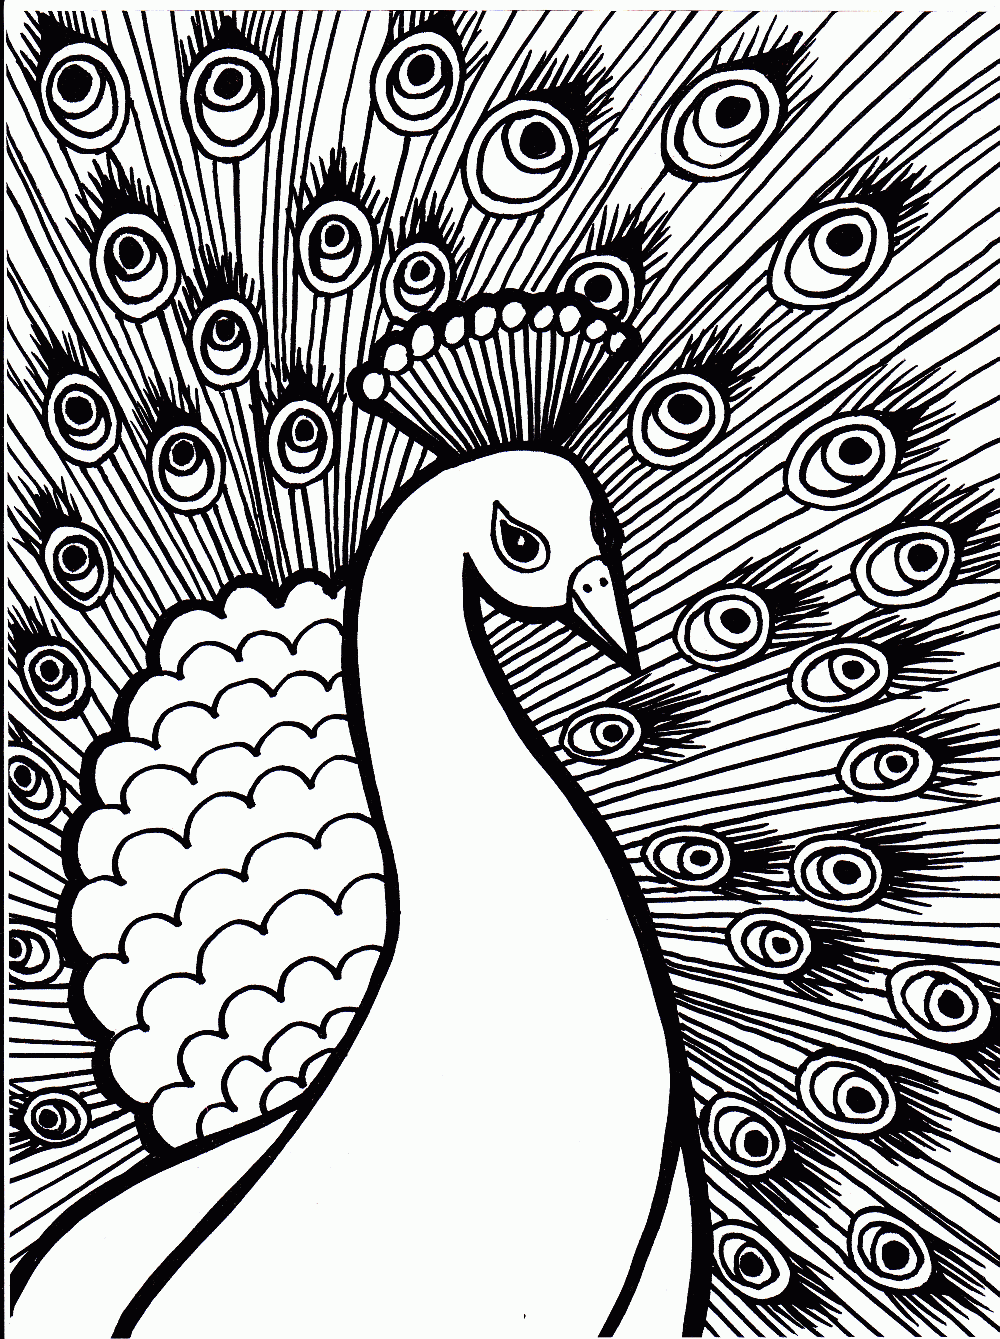 free-printable-peacock-coloring-pages-for-kids